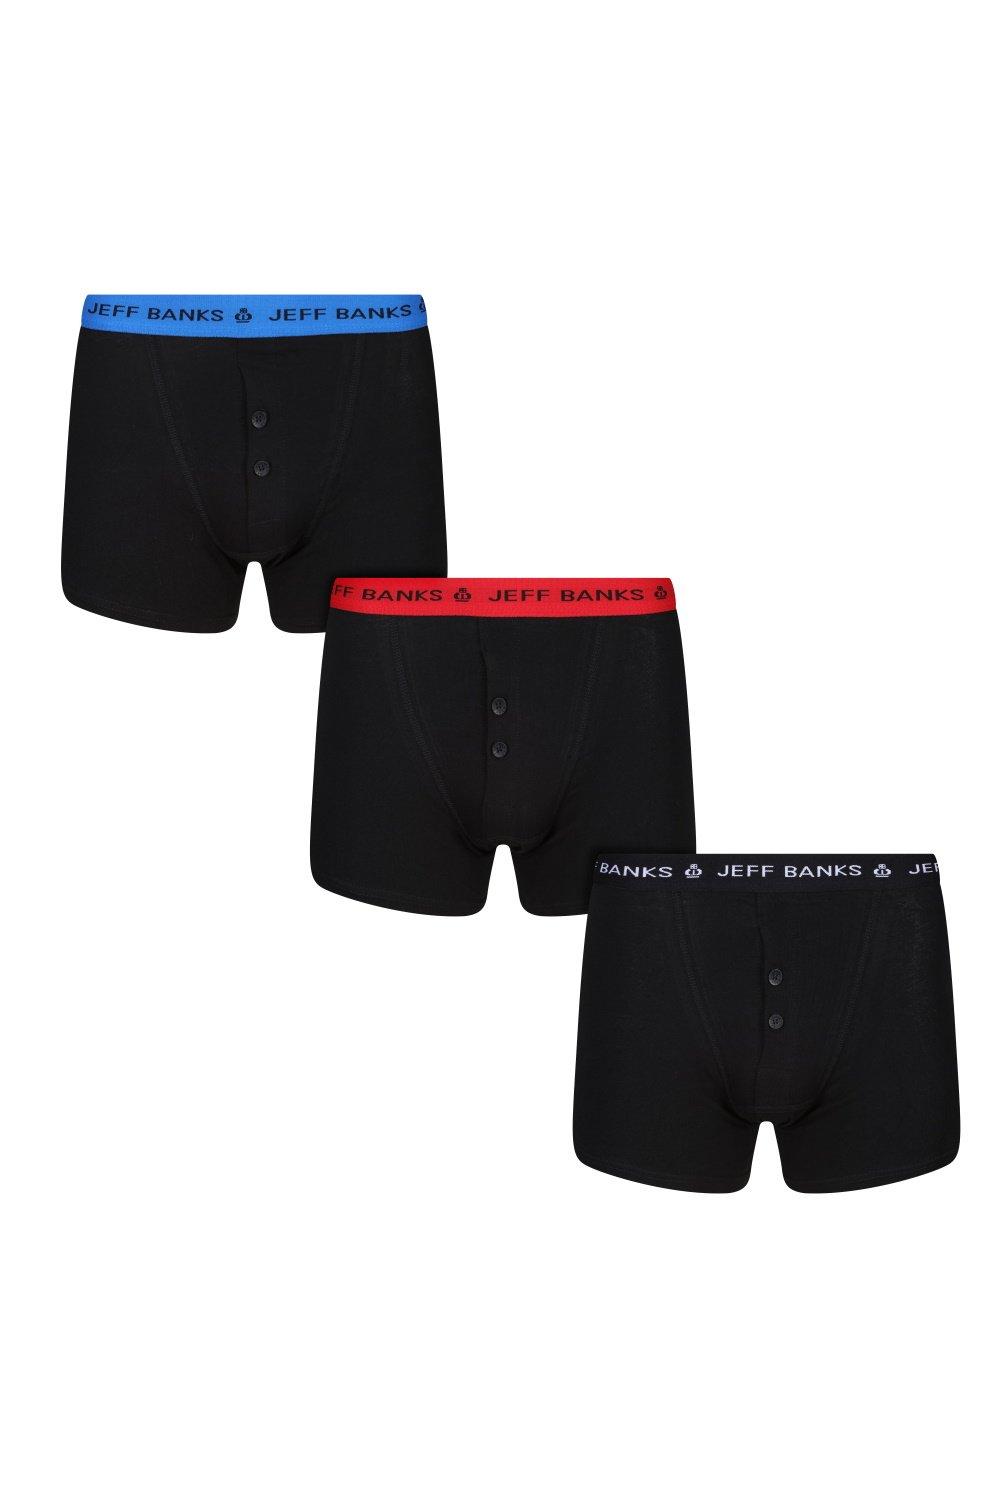 3 pair pack button fly boxers